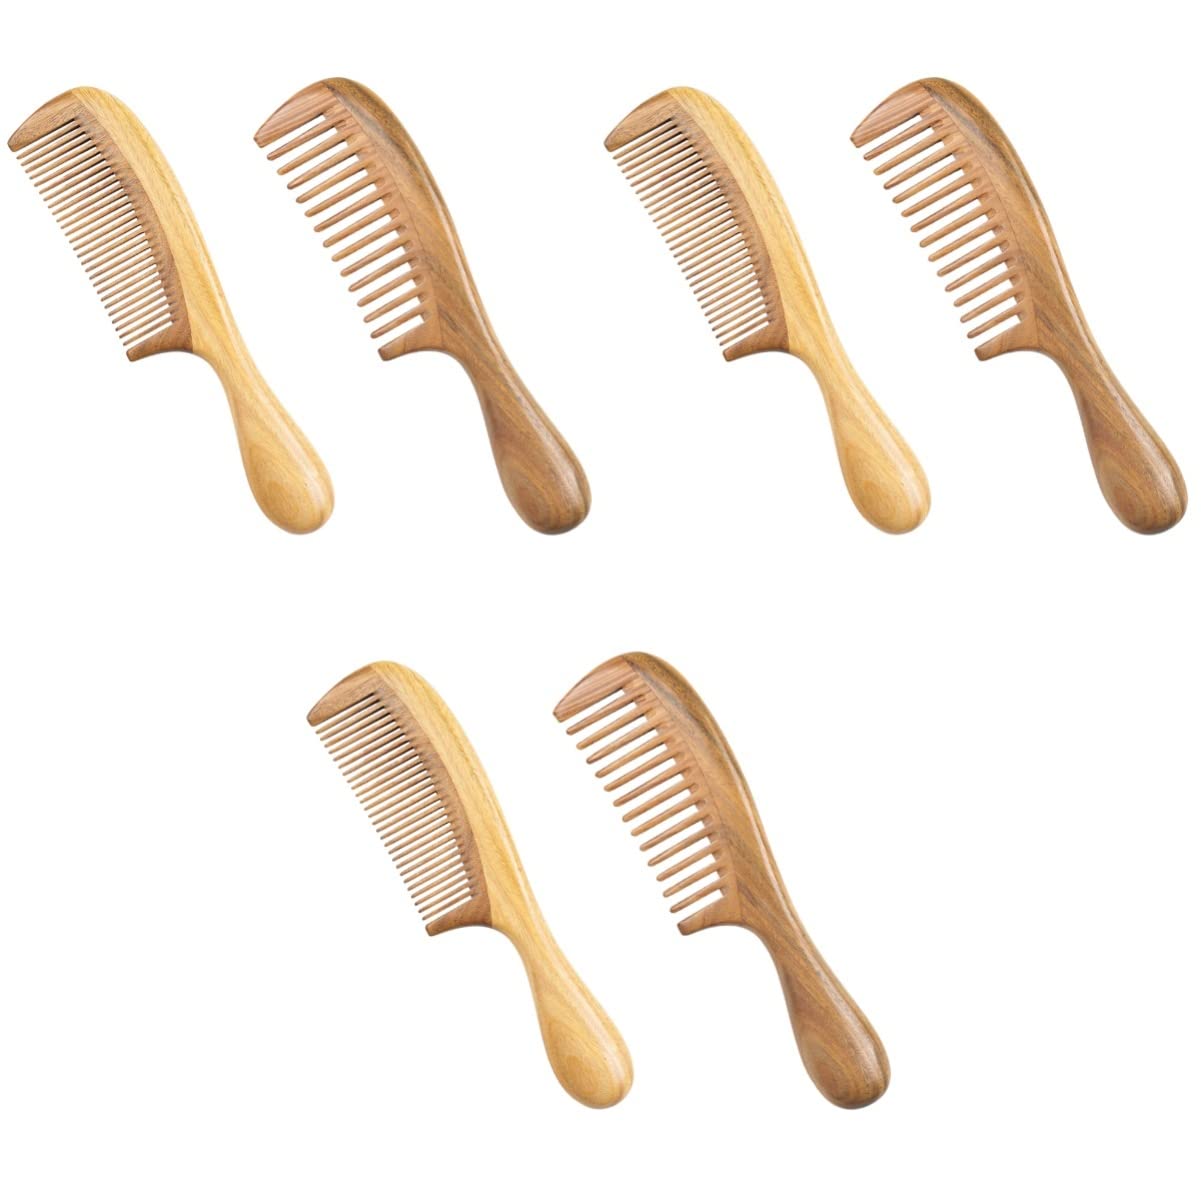 2pcs Scalp Sandelwood Men Portable Fine Combs Massage Hair for Comfort Style Wide Anti-Static and Women Wooden Wood Comb Smoothing Grip Ladies Teeth Kämme aus Holz (Color : Picture 1x3pcs, Size : 18